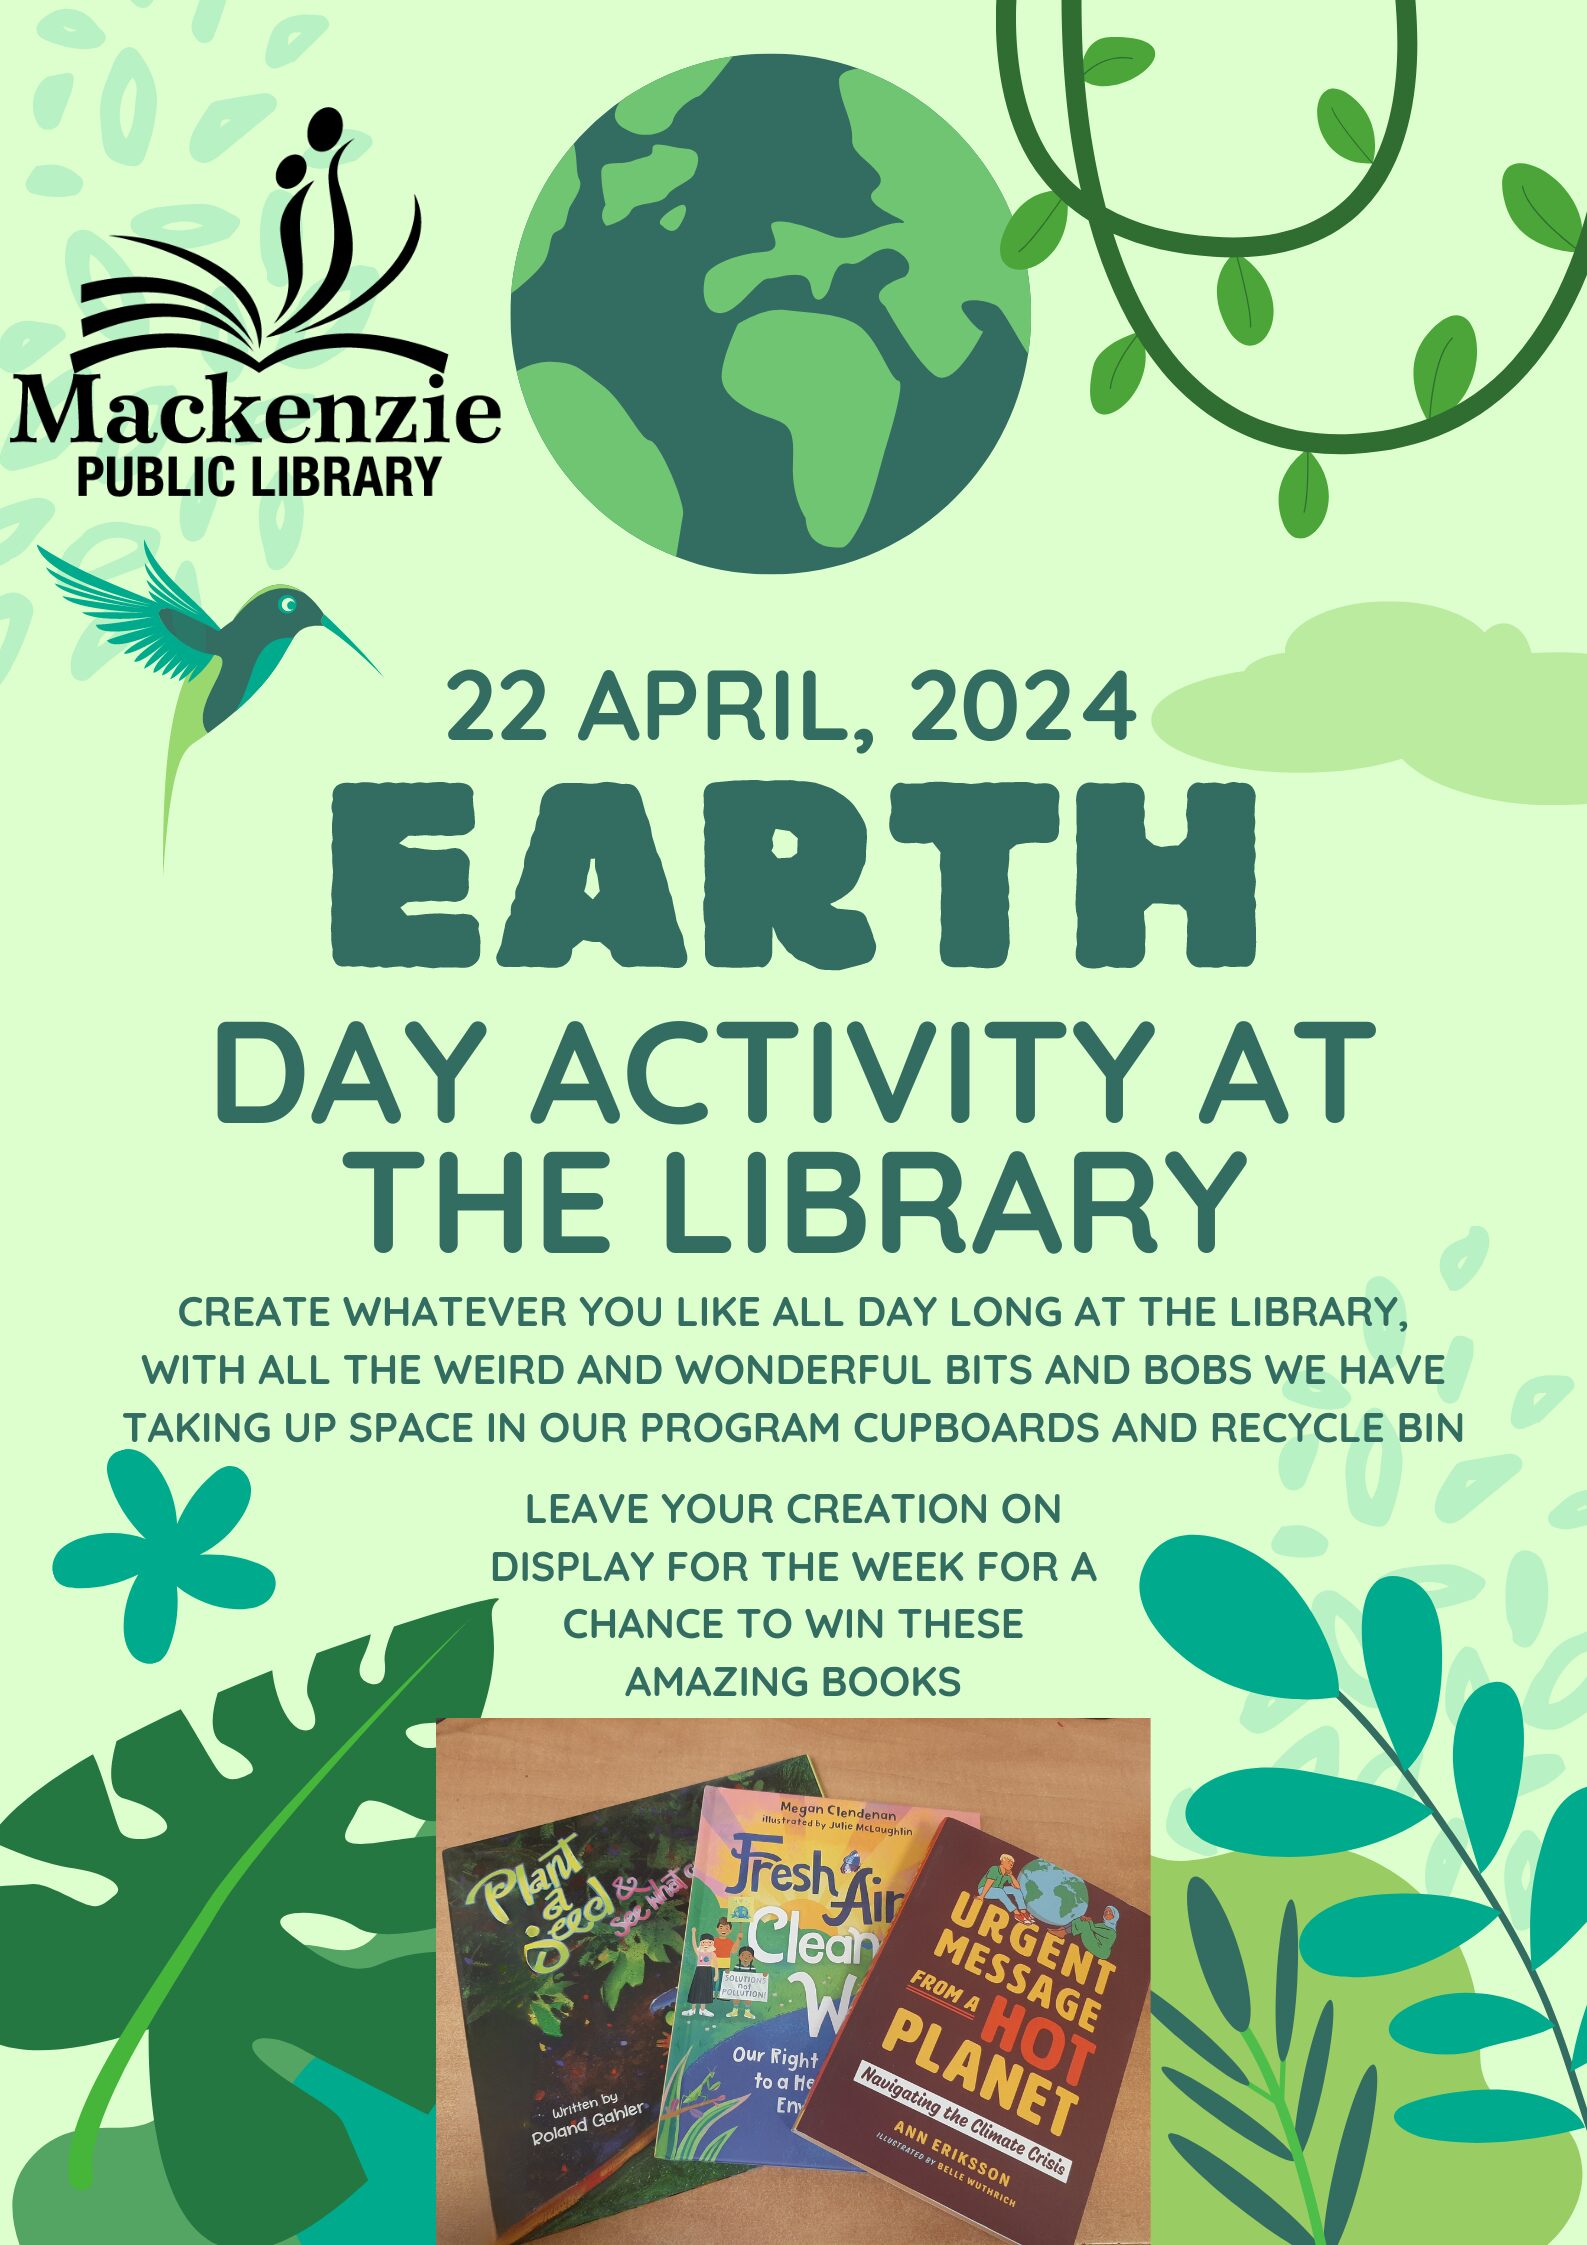 22 April, 2024 Earth day activity at the library create whatever you like all day long at the library, with all the weird and wonderful bits and bobs we have taking up space in our program cupboards and recycle bin leave your creation on display for the week for a chance to win these amazing books